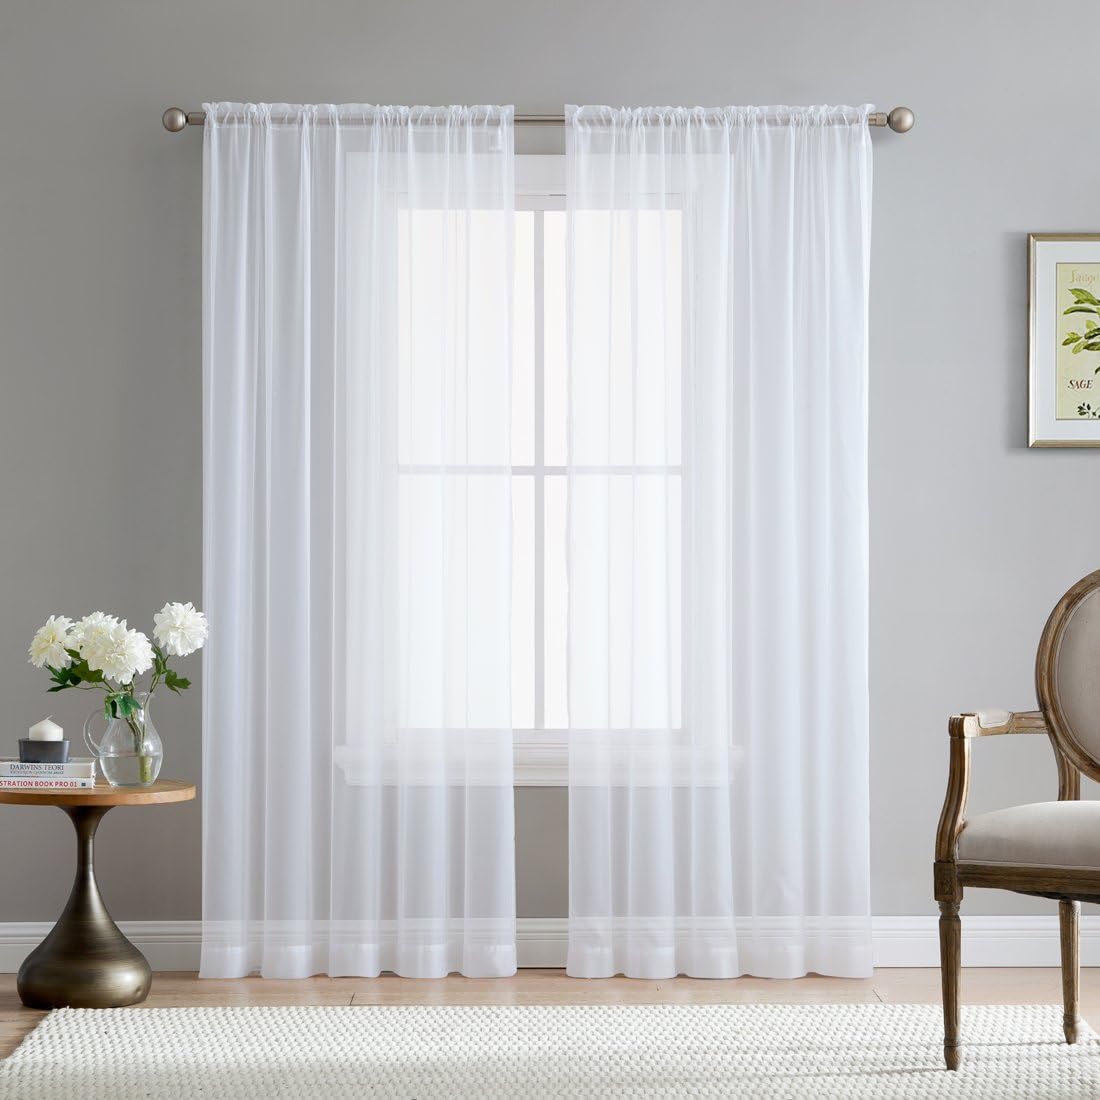 A window covered by sheer curtains in a kitchen.